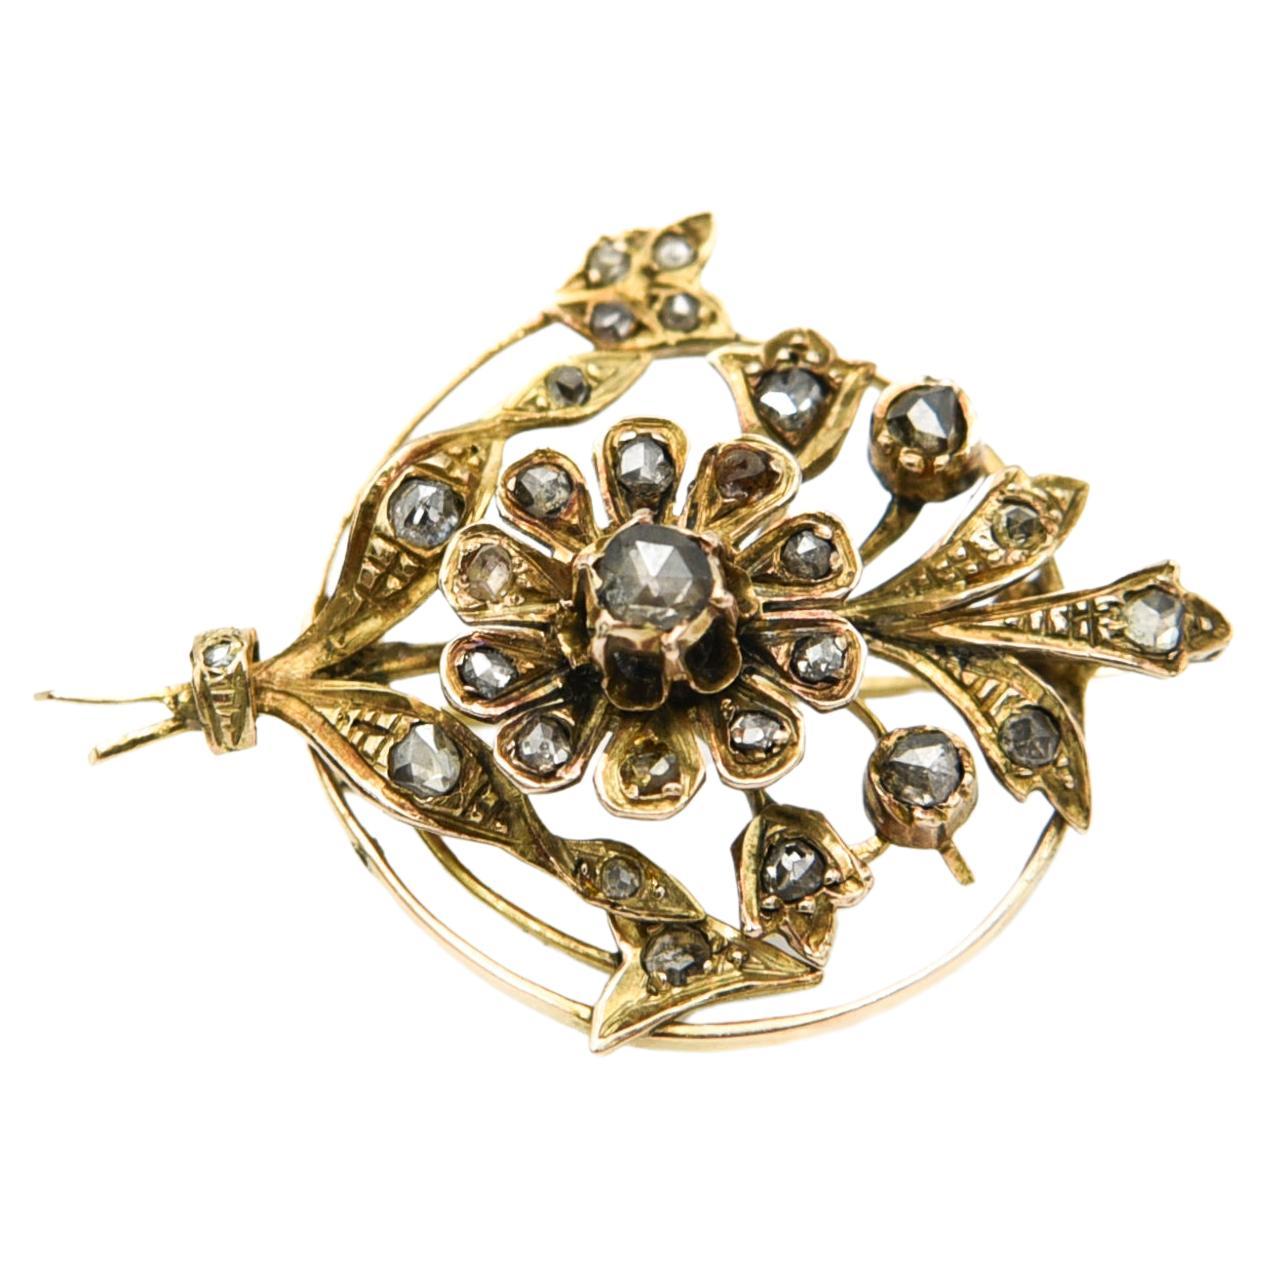 Antique gold brooch with diamonds, Netherlands, mid-19th century.